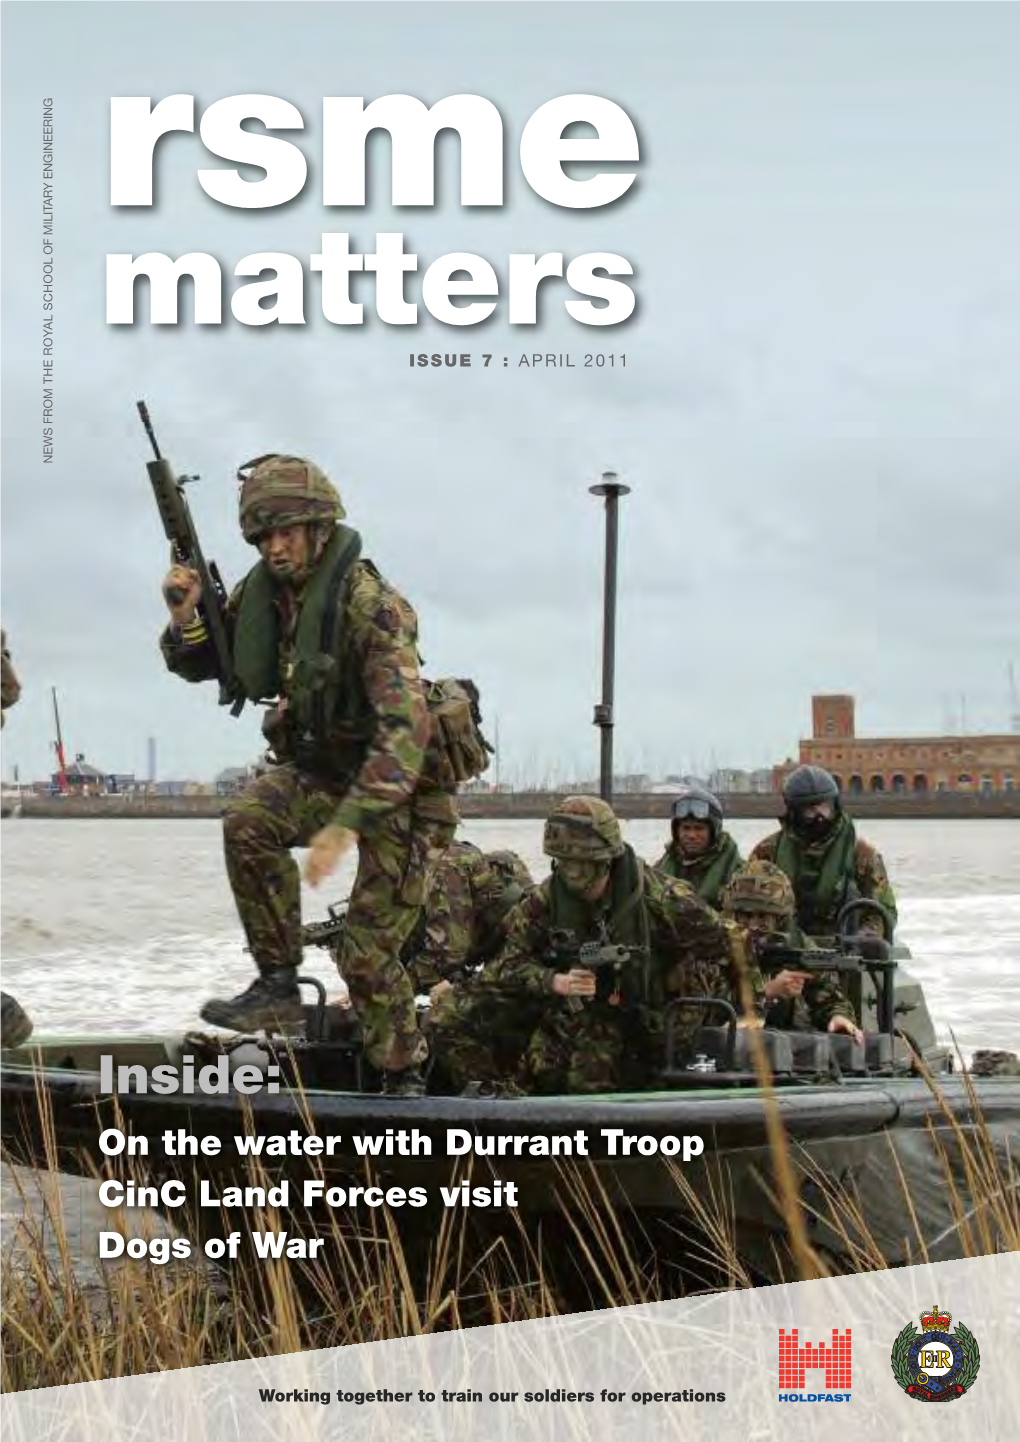 Rsme Matters ISSUE 7 : APRIL 2011 NEWS from the ROYAL SCHOOL of MILITARY ENGINEERING from NEWS the ROYAL SCHOOLMILITARY OF